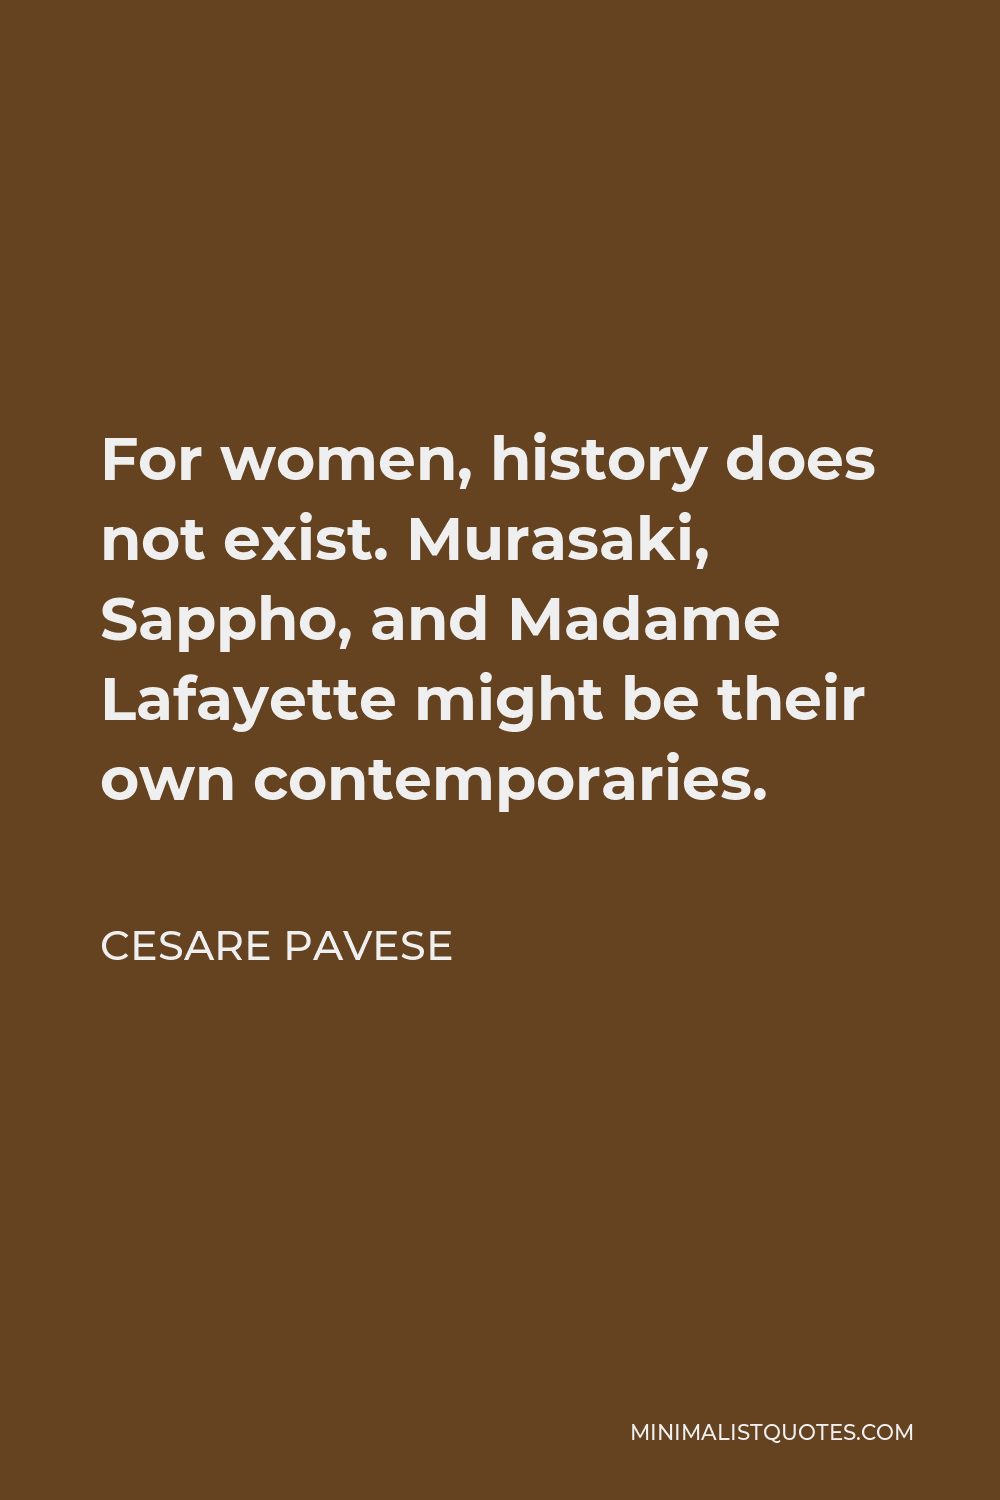 Cesare Pavese Quote - For women, history does not exist. Murasaki, Sappho, and Madame Lafayette might be their own contemporaries.